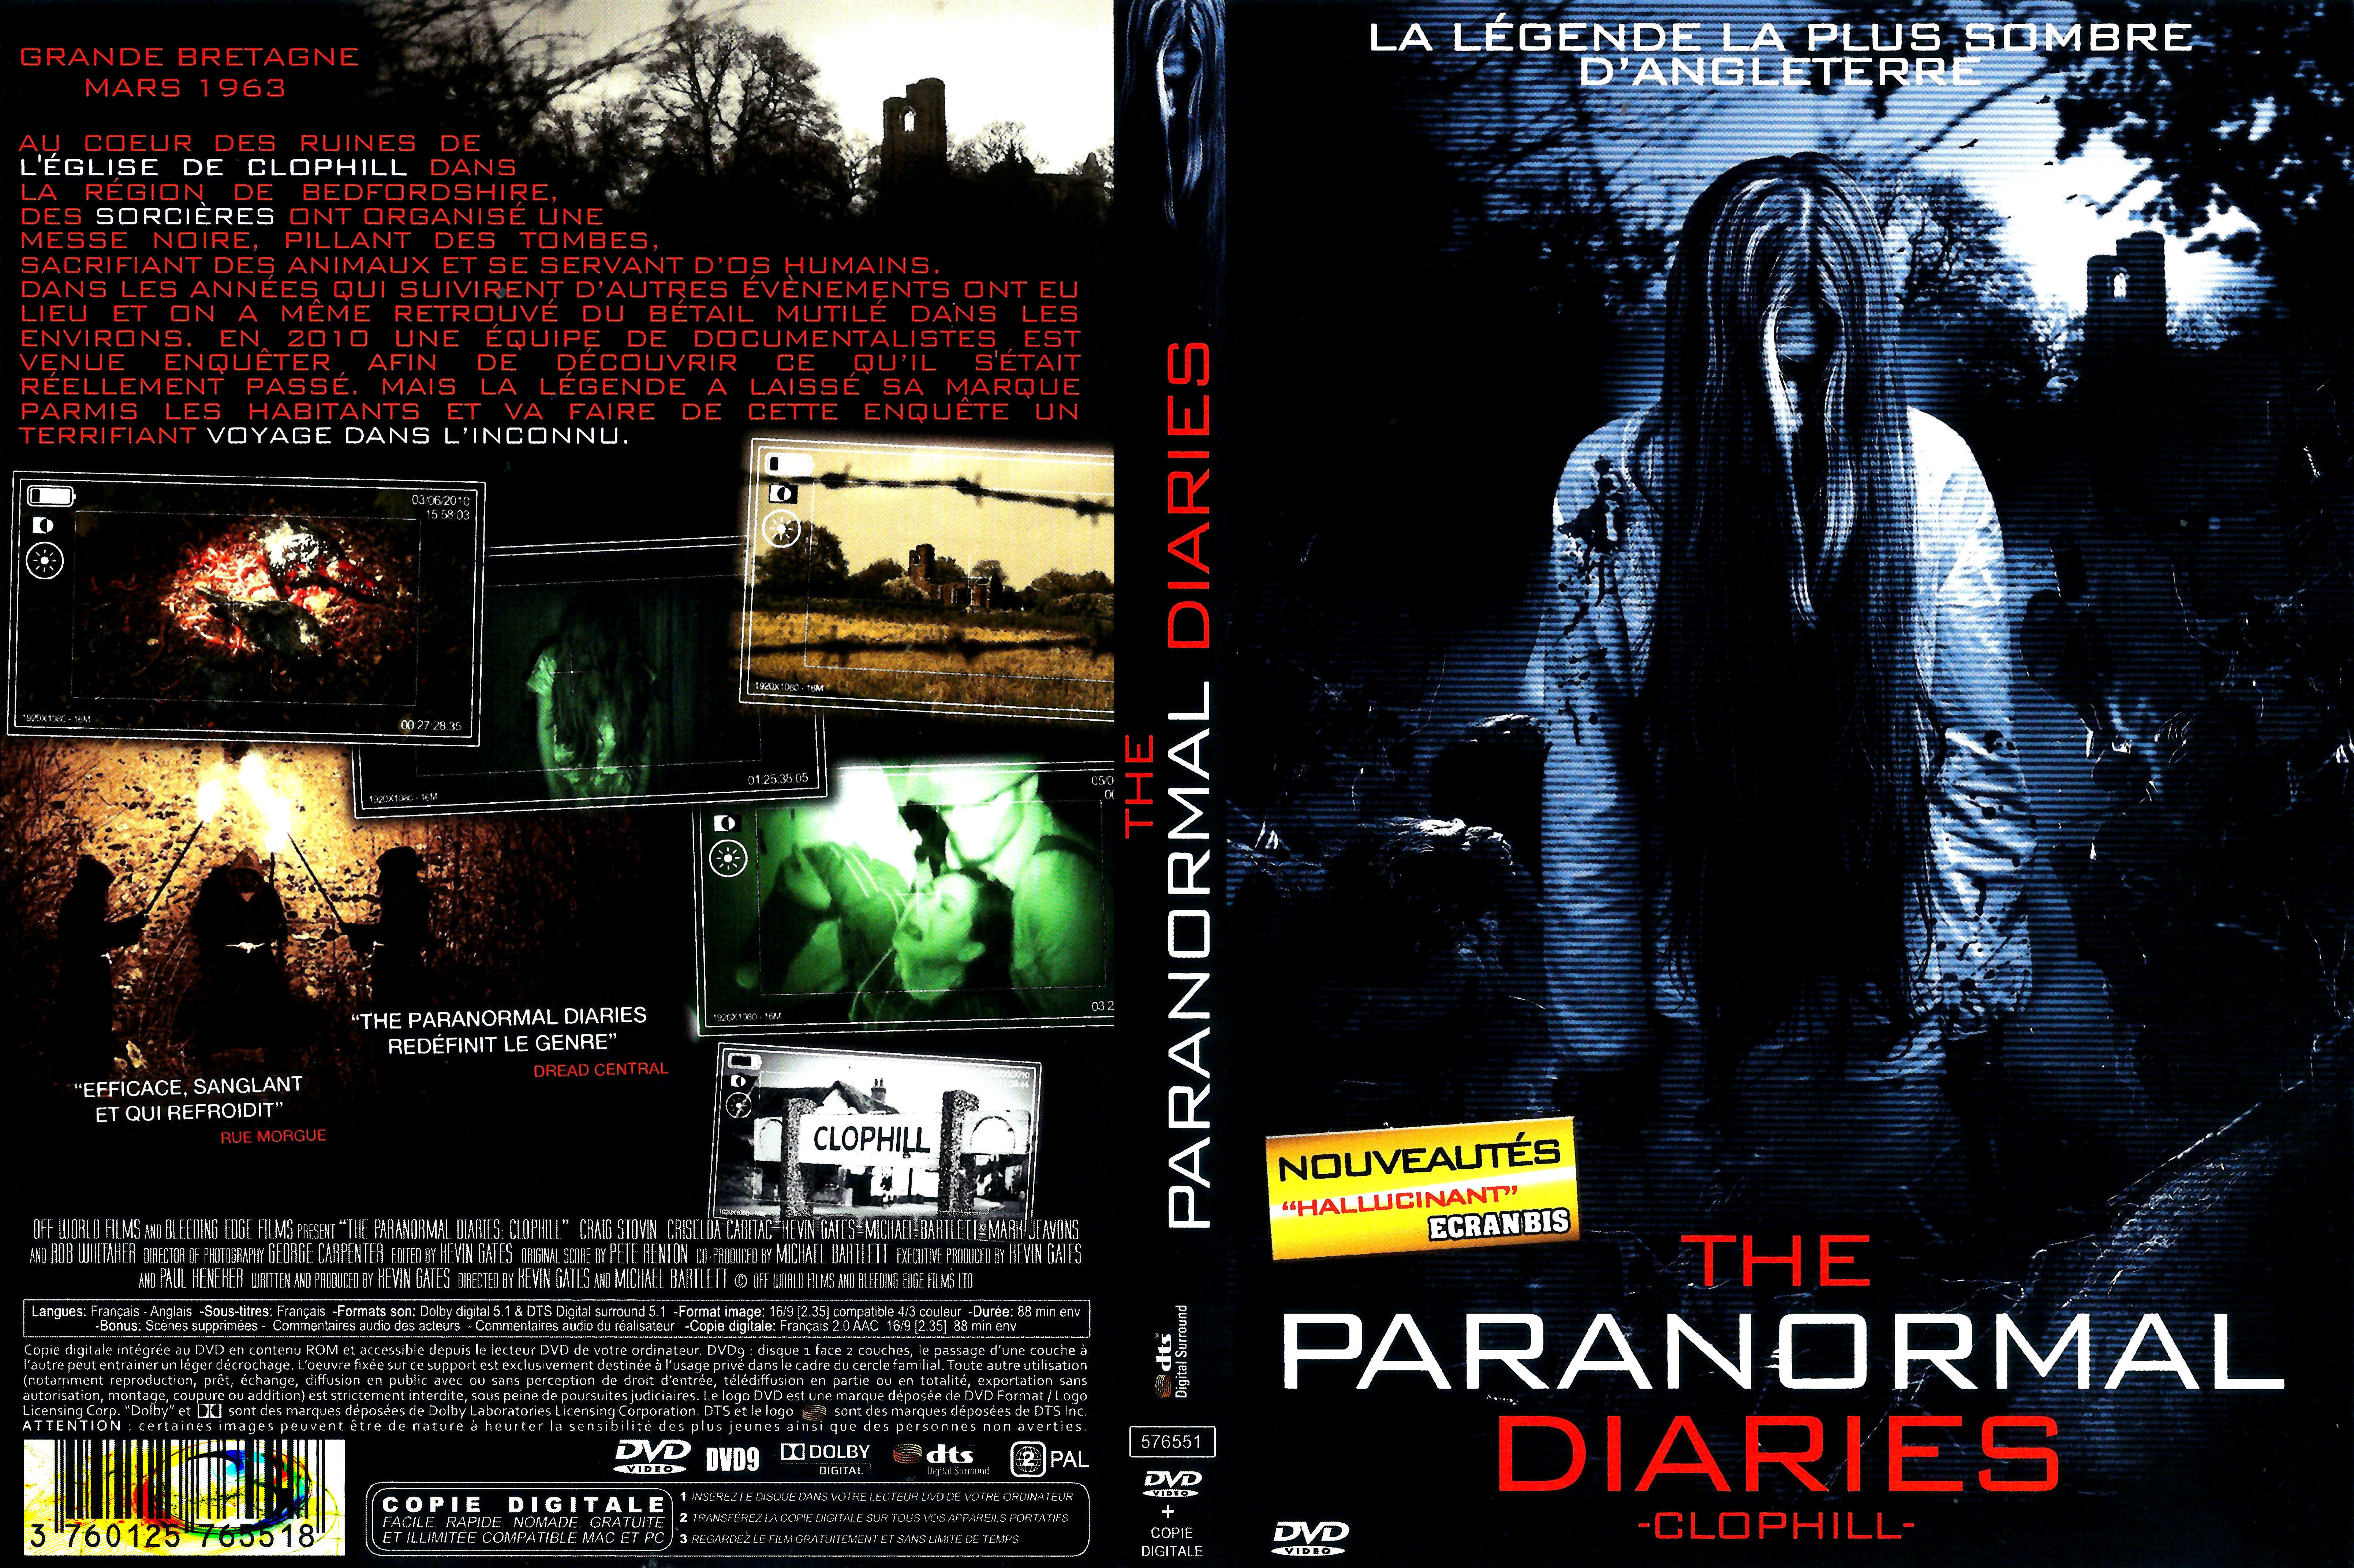 Jaquette DVD The paranormal diaries